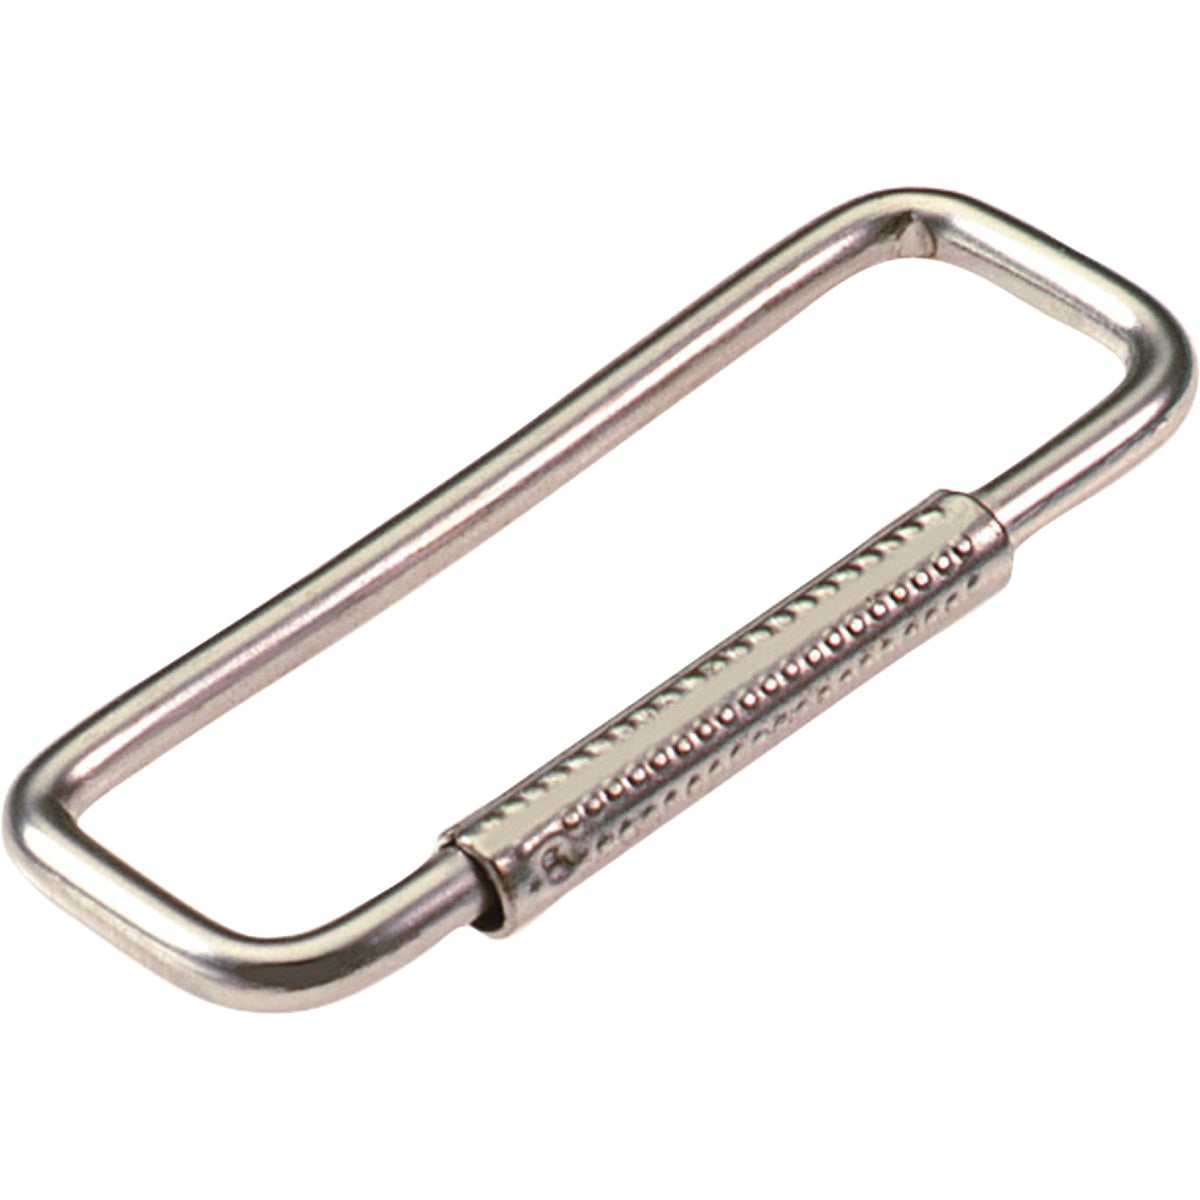 Item 572926, Spring sleeve key ring featuring durable steel construction with a bright 